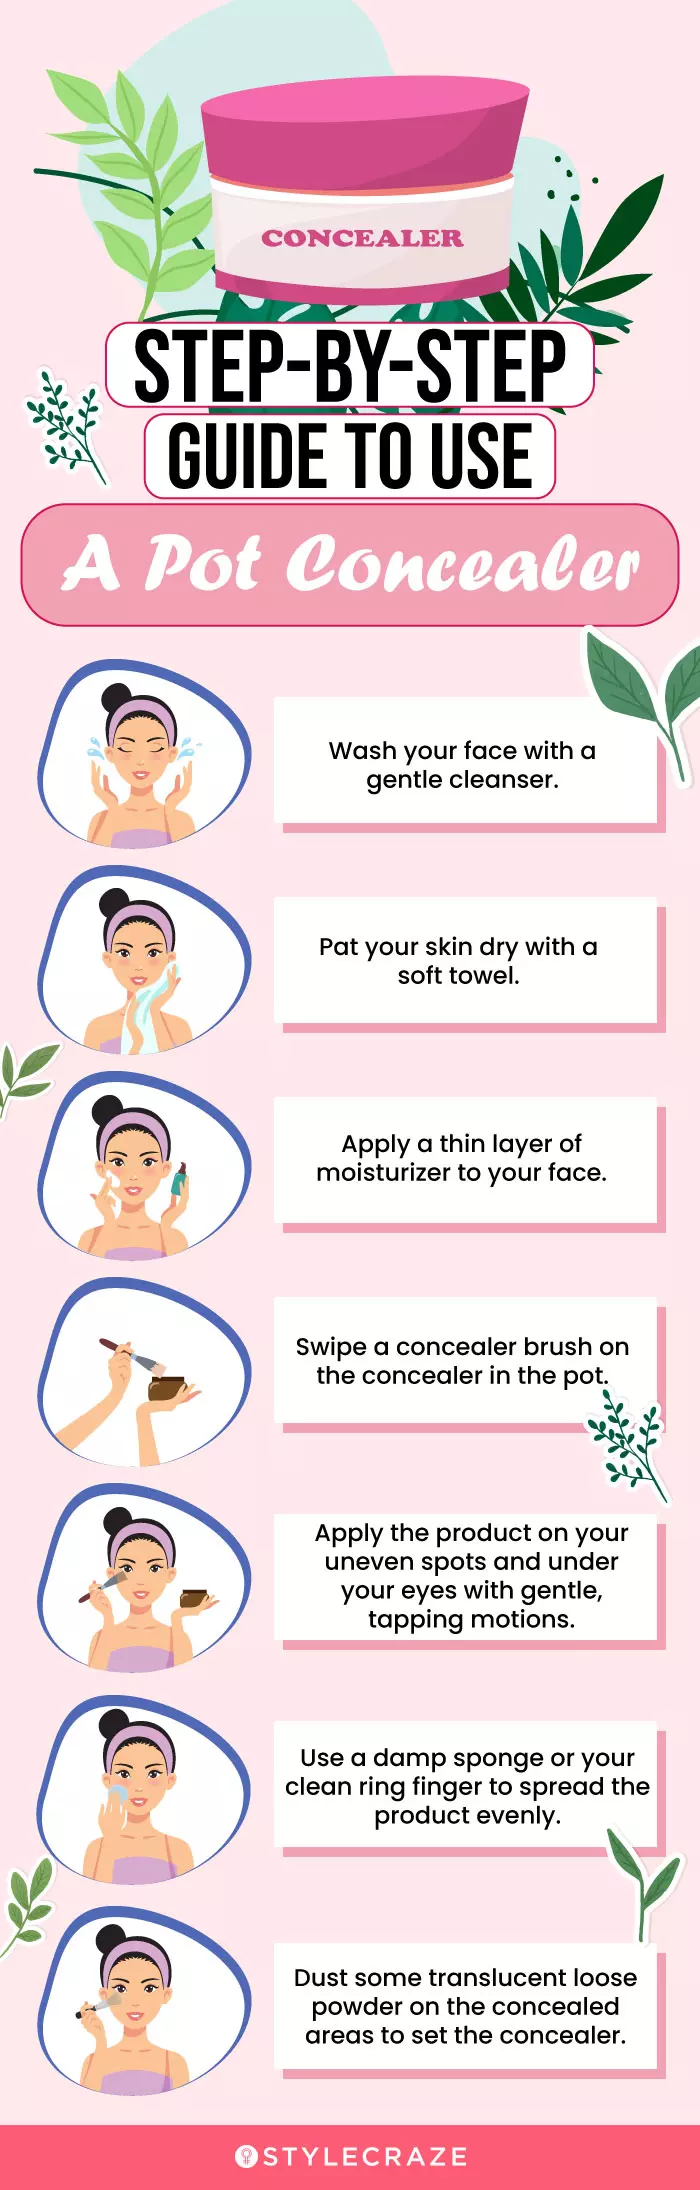 Step-By-Step Guide To Use A Pot Concealer (infographic)